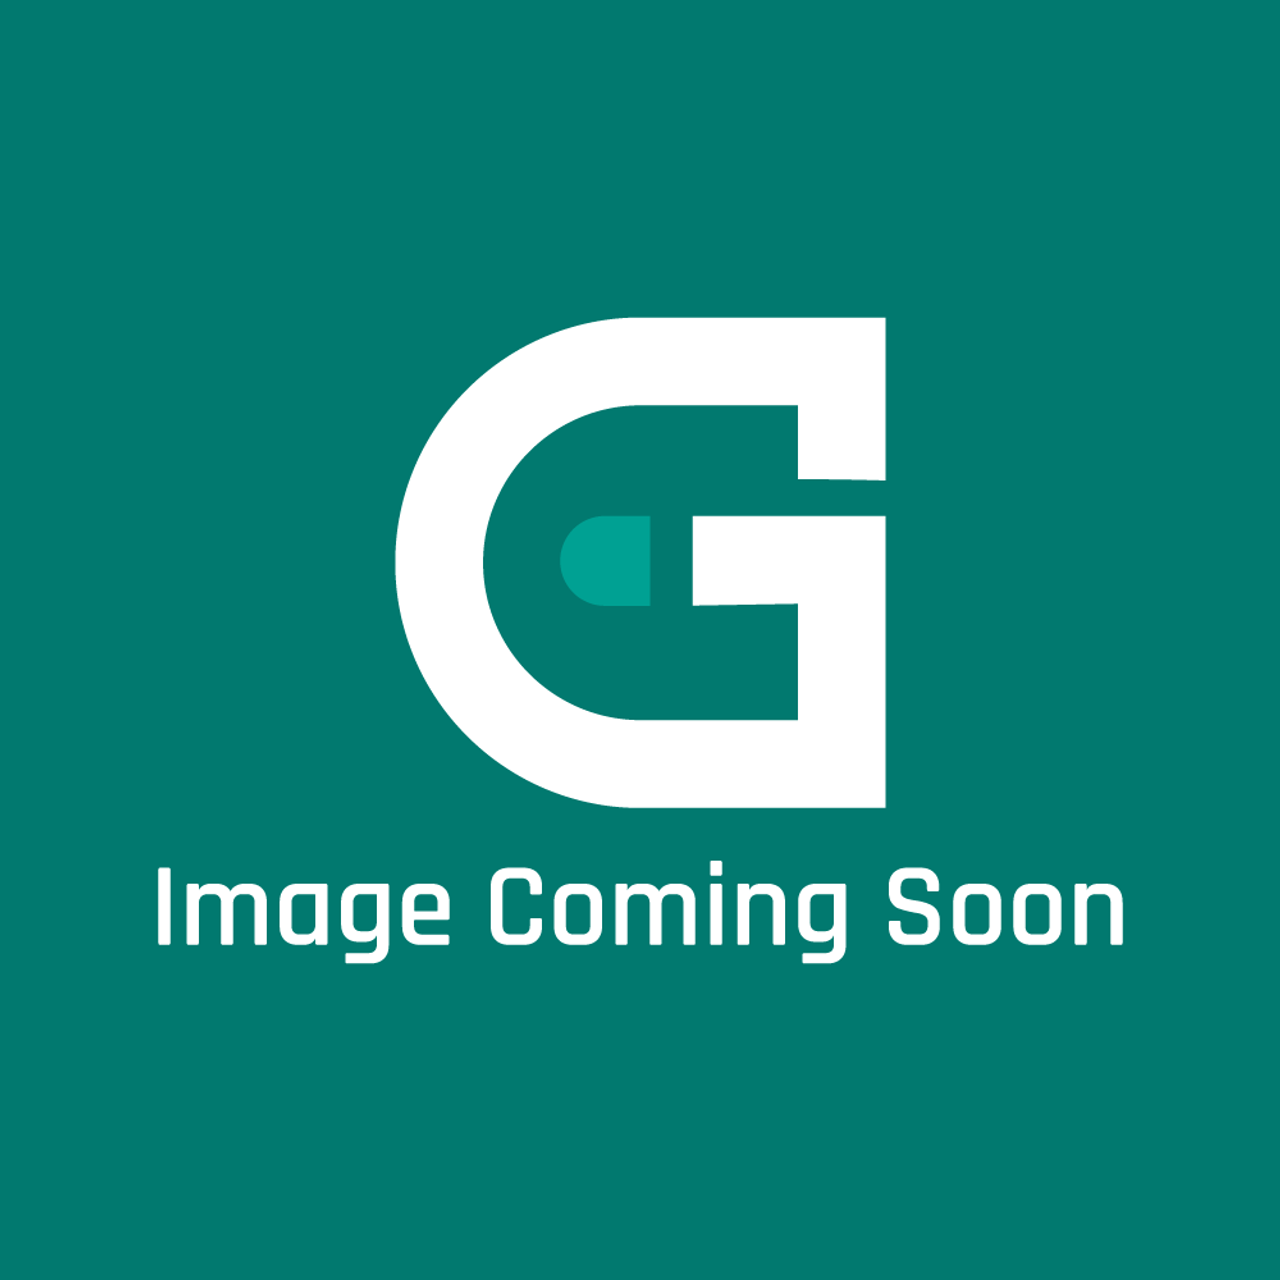 GE Appliances WB18X35327 - Harness Cooktop - Image Coming Soon!